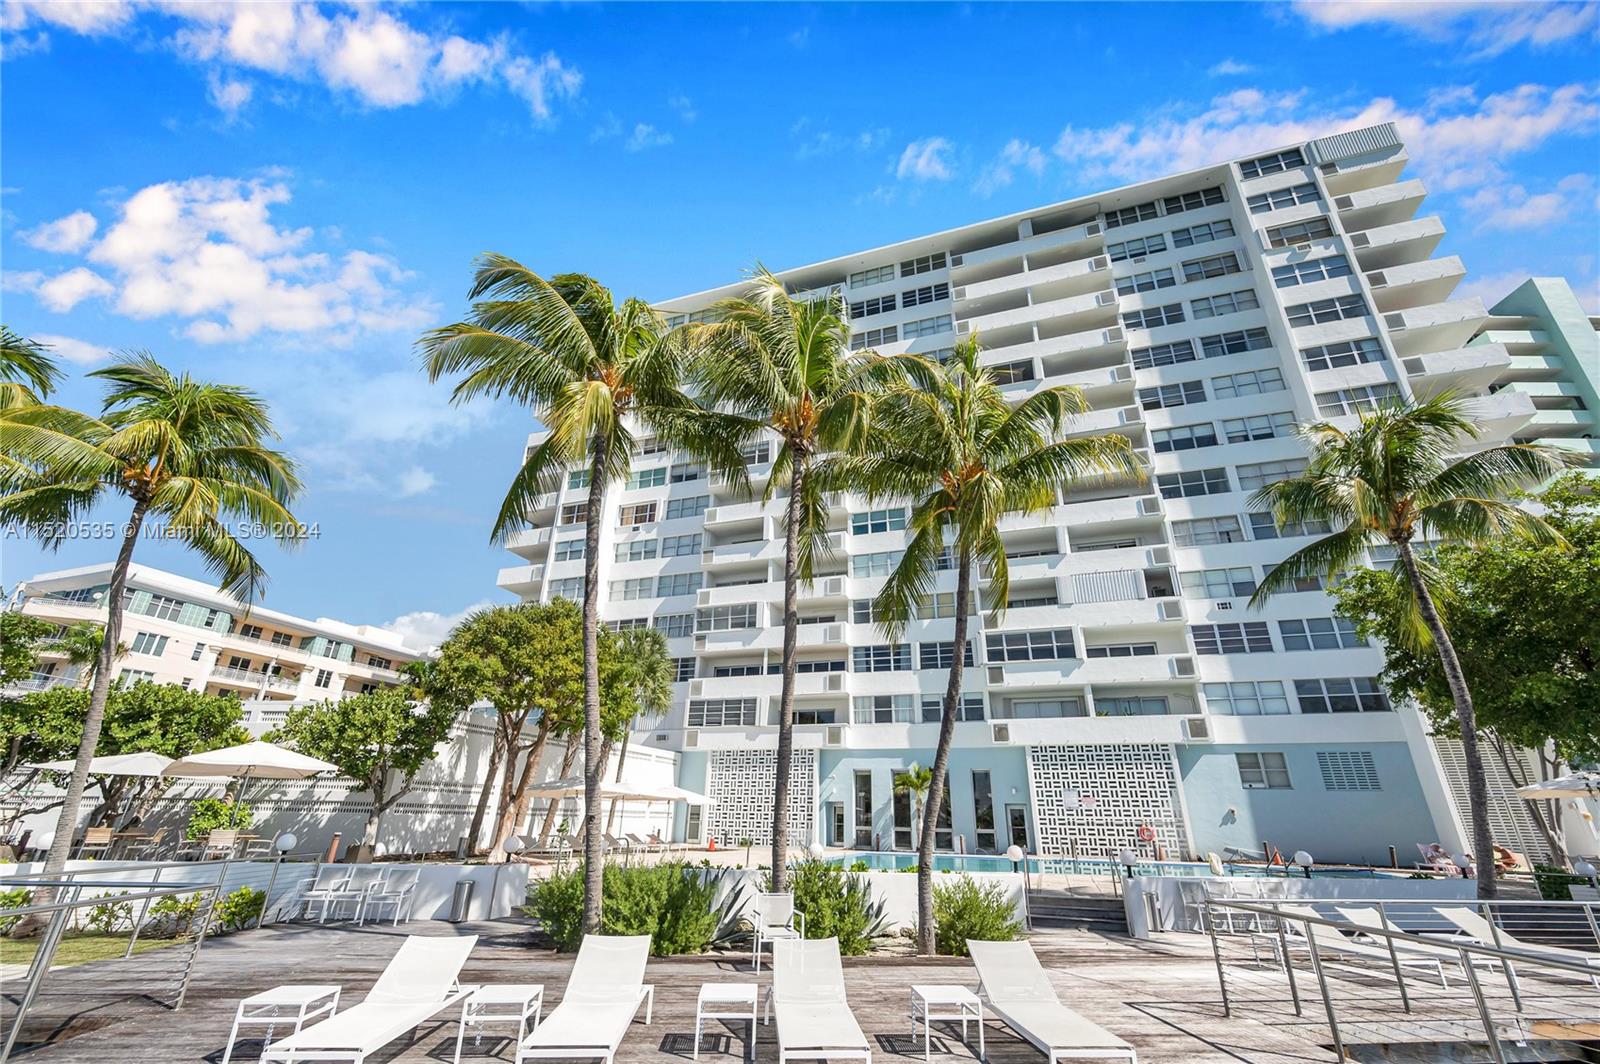 3 Island Ave Unit 14I, Miami Beach, Florida, 33139, United States, 2 Bedrooms Bedrooms, ,2 BathroomsBathrooms,Residential,For Sale,3 Island Ave Unit 14I,1446104